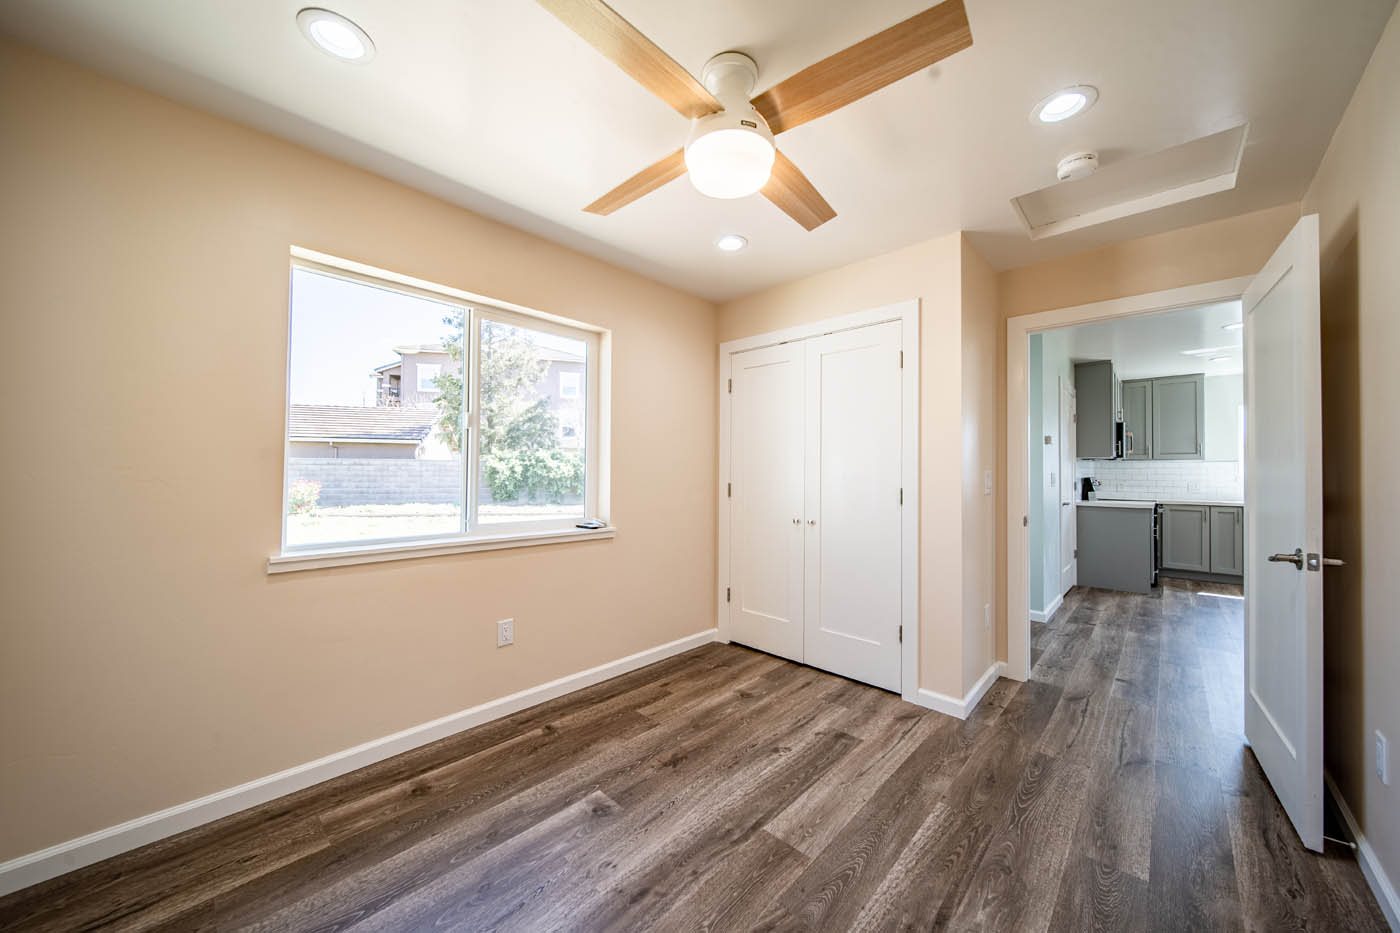 Anchored Tiny Homes Boise ADU Gallery: 2-Bedroom ADUs. - 23